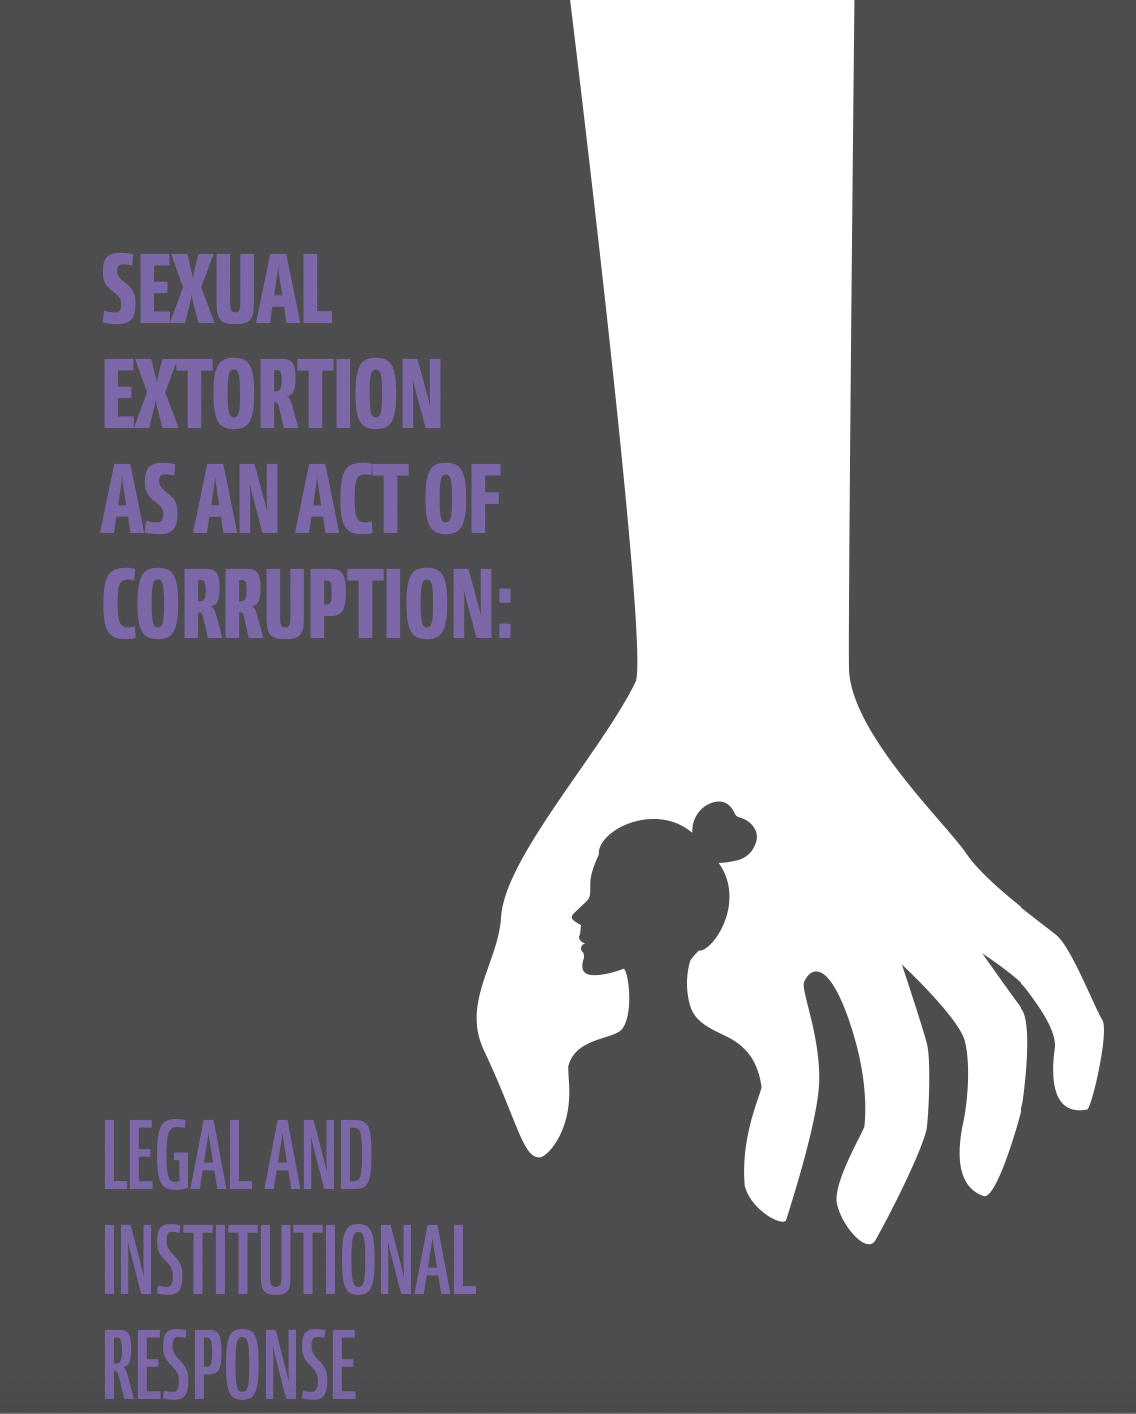 Sexual extortion as an act of corruption: Legal and institutional response